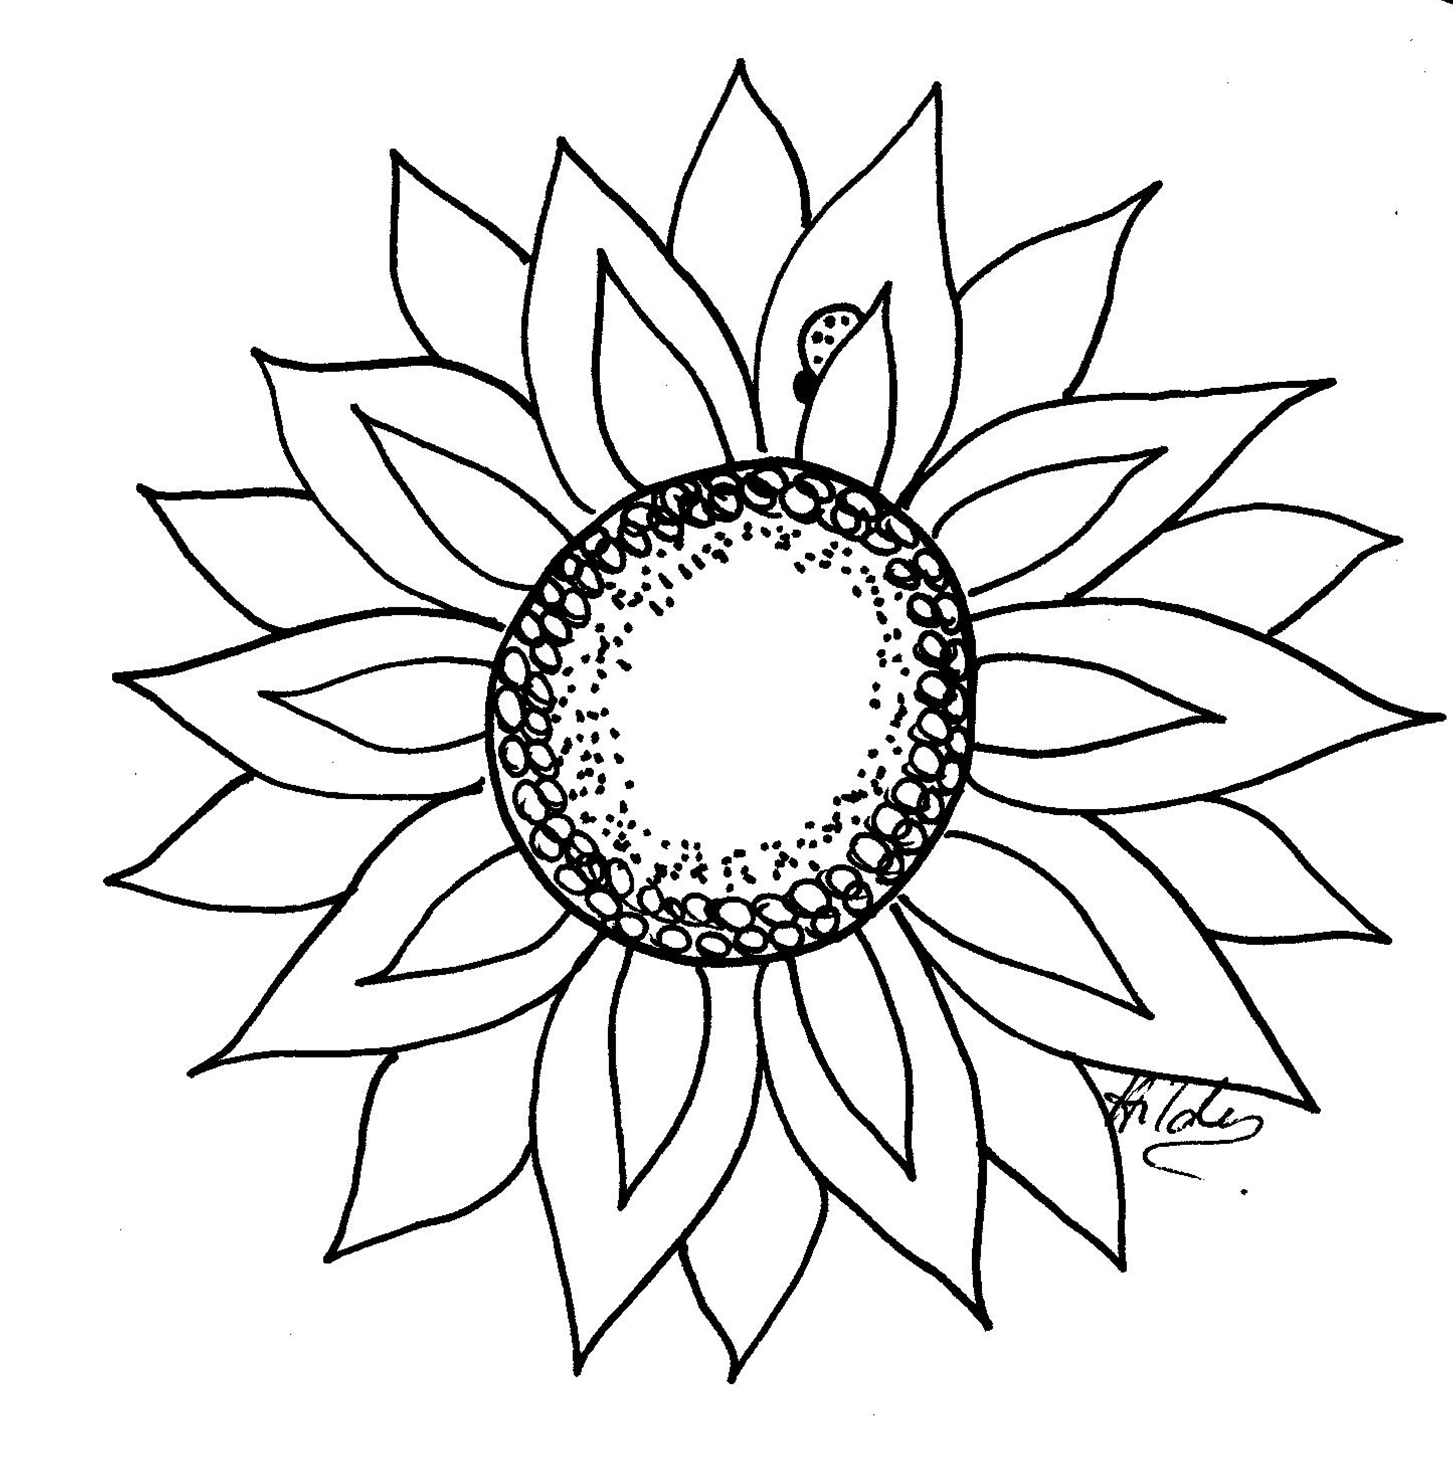 Sunflower Clipart Black And White #26777.